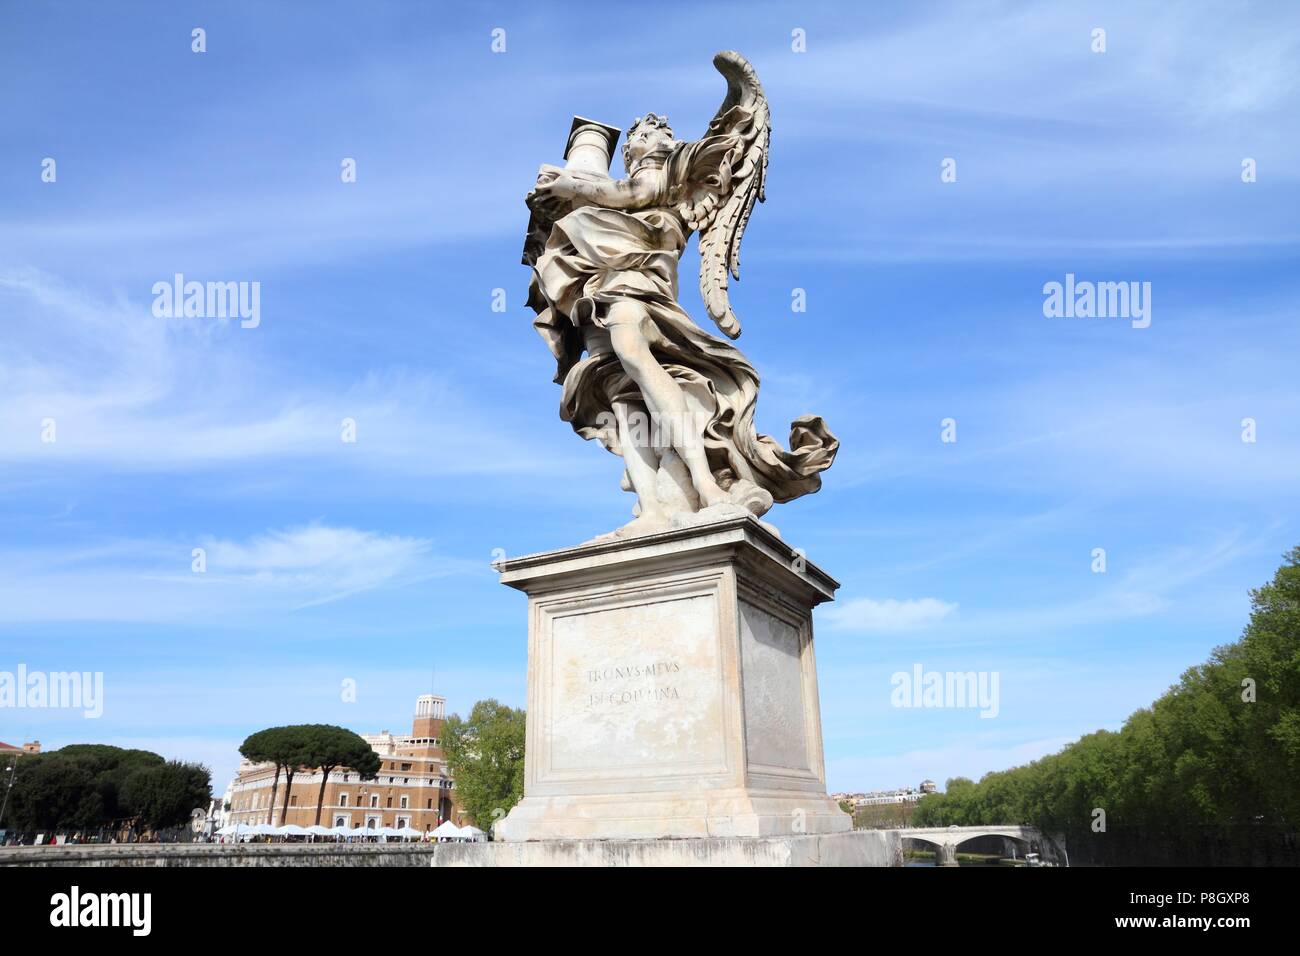 Angel in Rome, Italy. One of the angels at famous Ponte Sant' Angelo bridge. Baroque sculpture by Antonio Raggi. Stock Photo